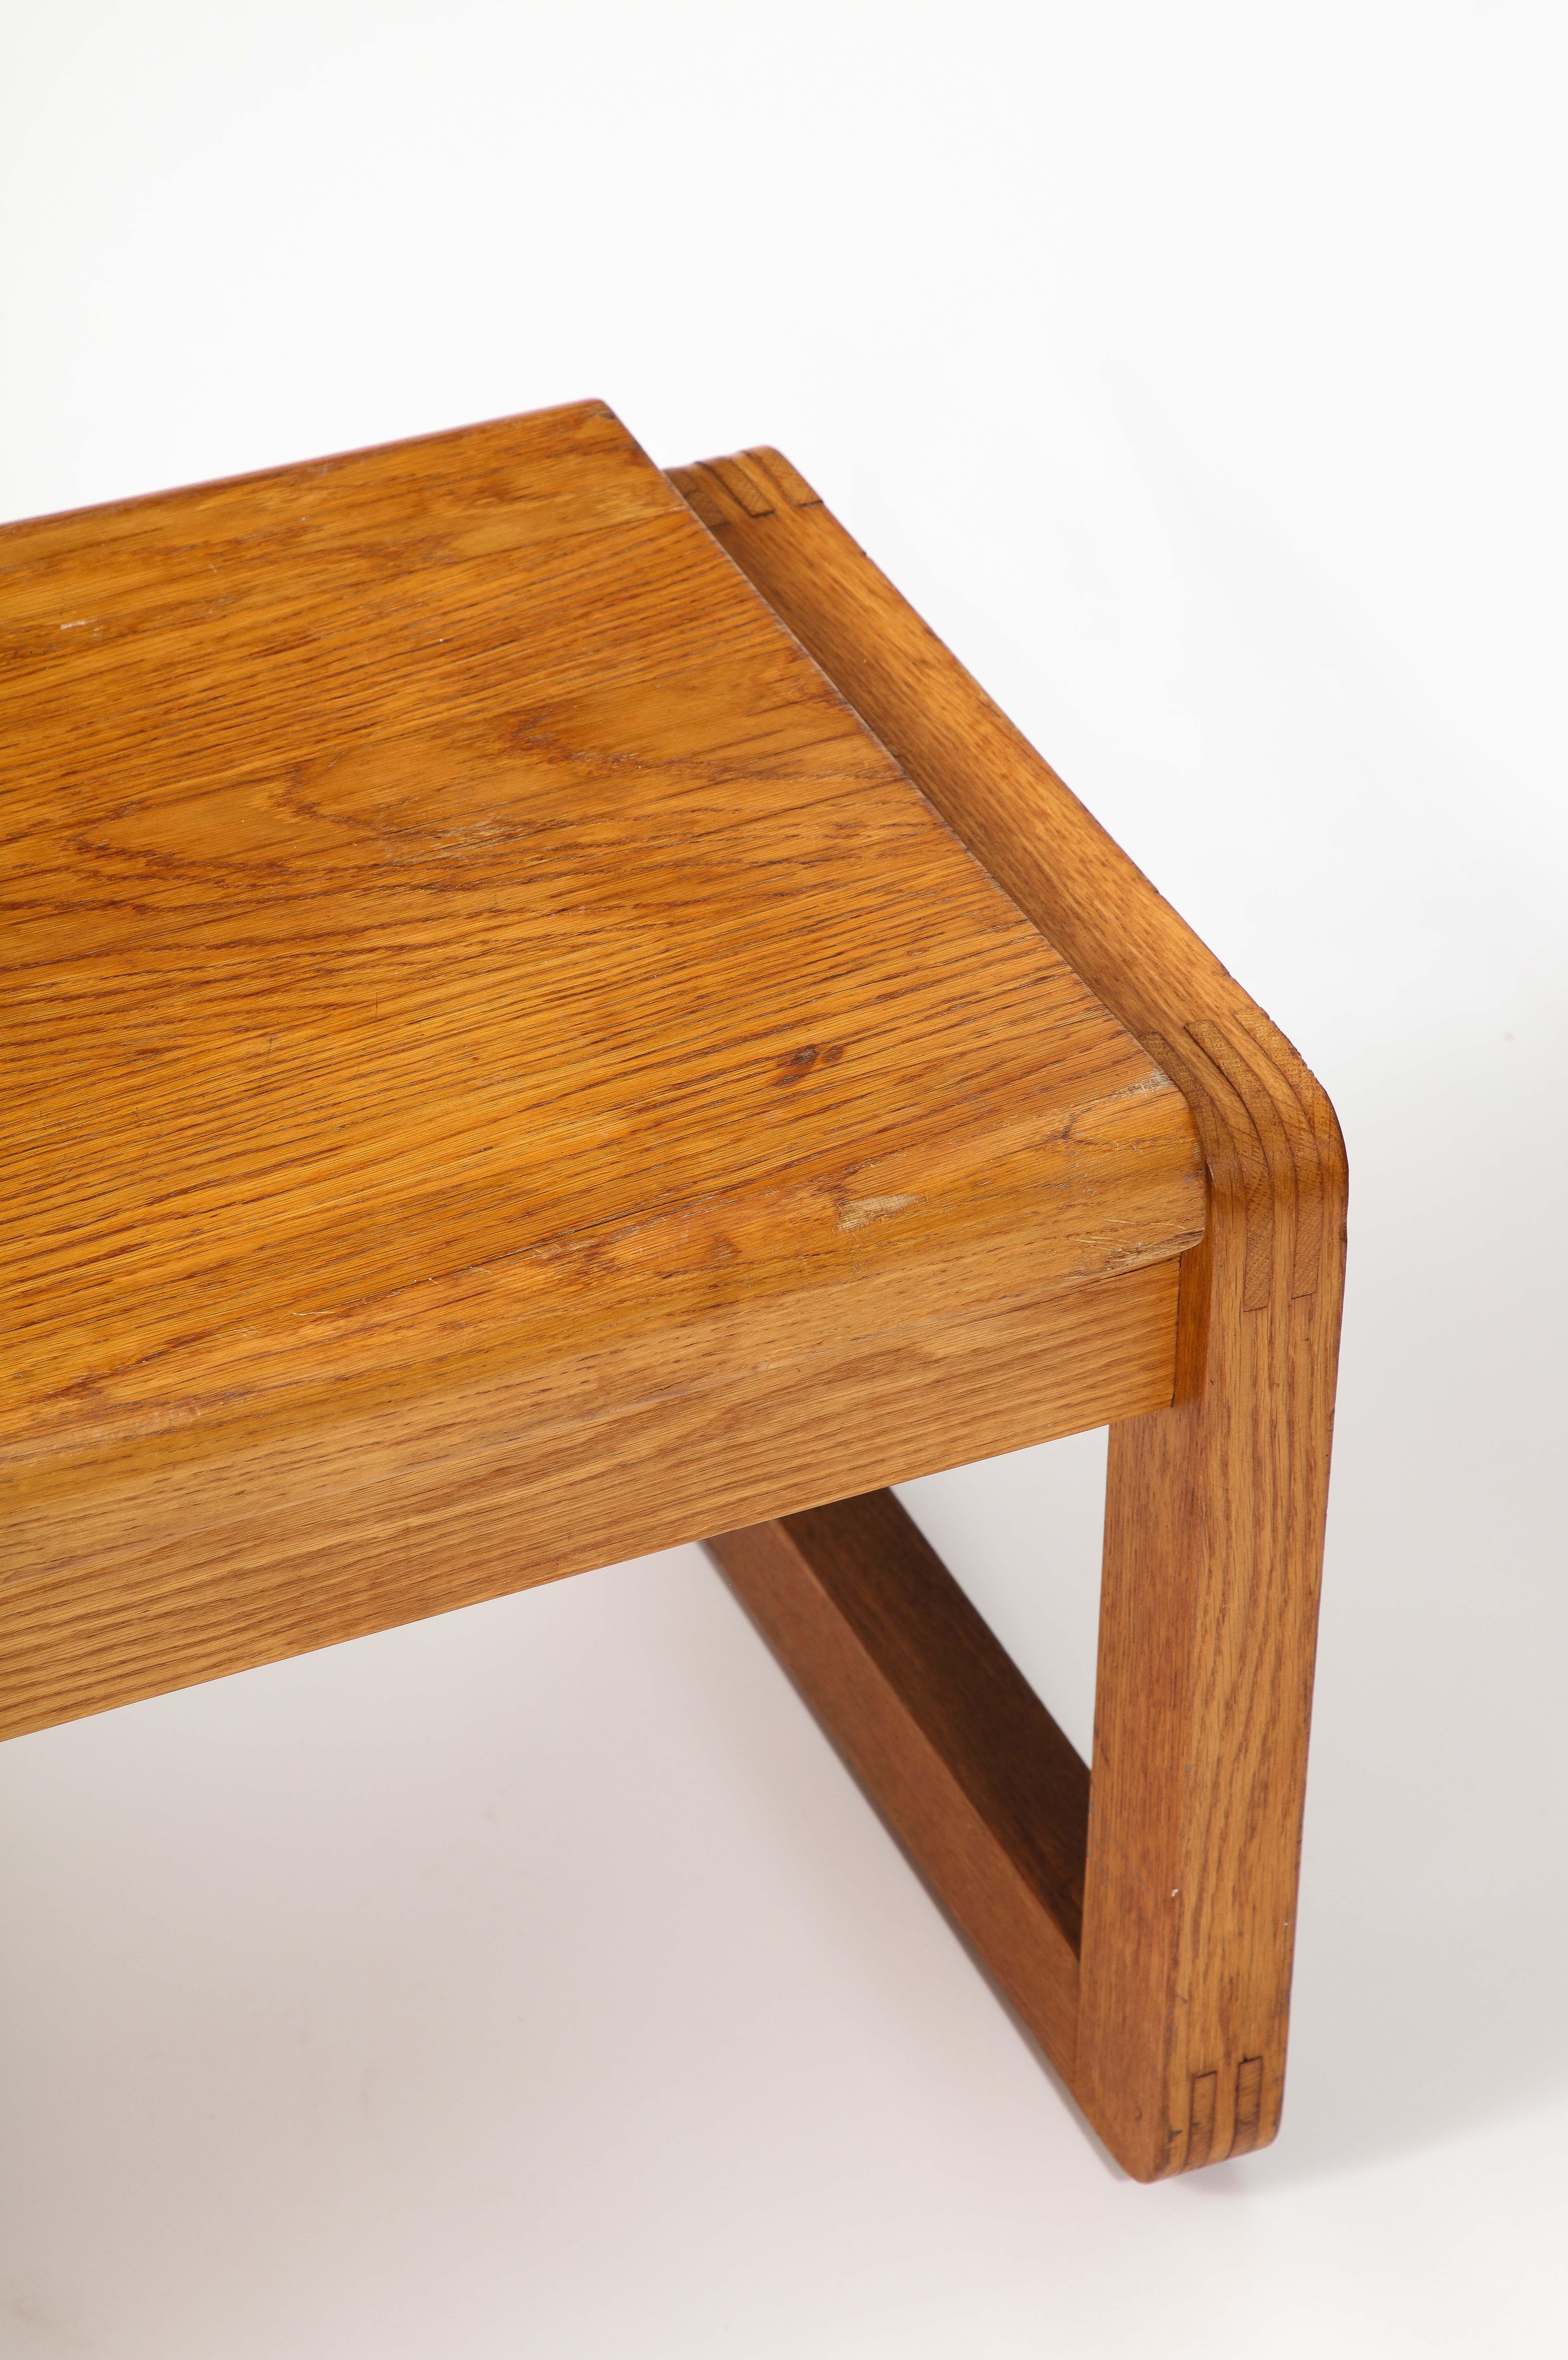 Minimalist Solid Oak Bench in style of Guillerme & Chambron  - Netherlands 1970s For Sale 3